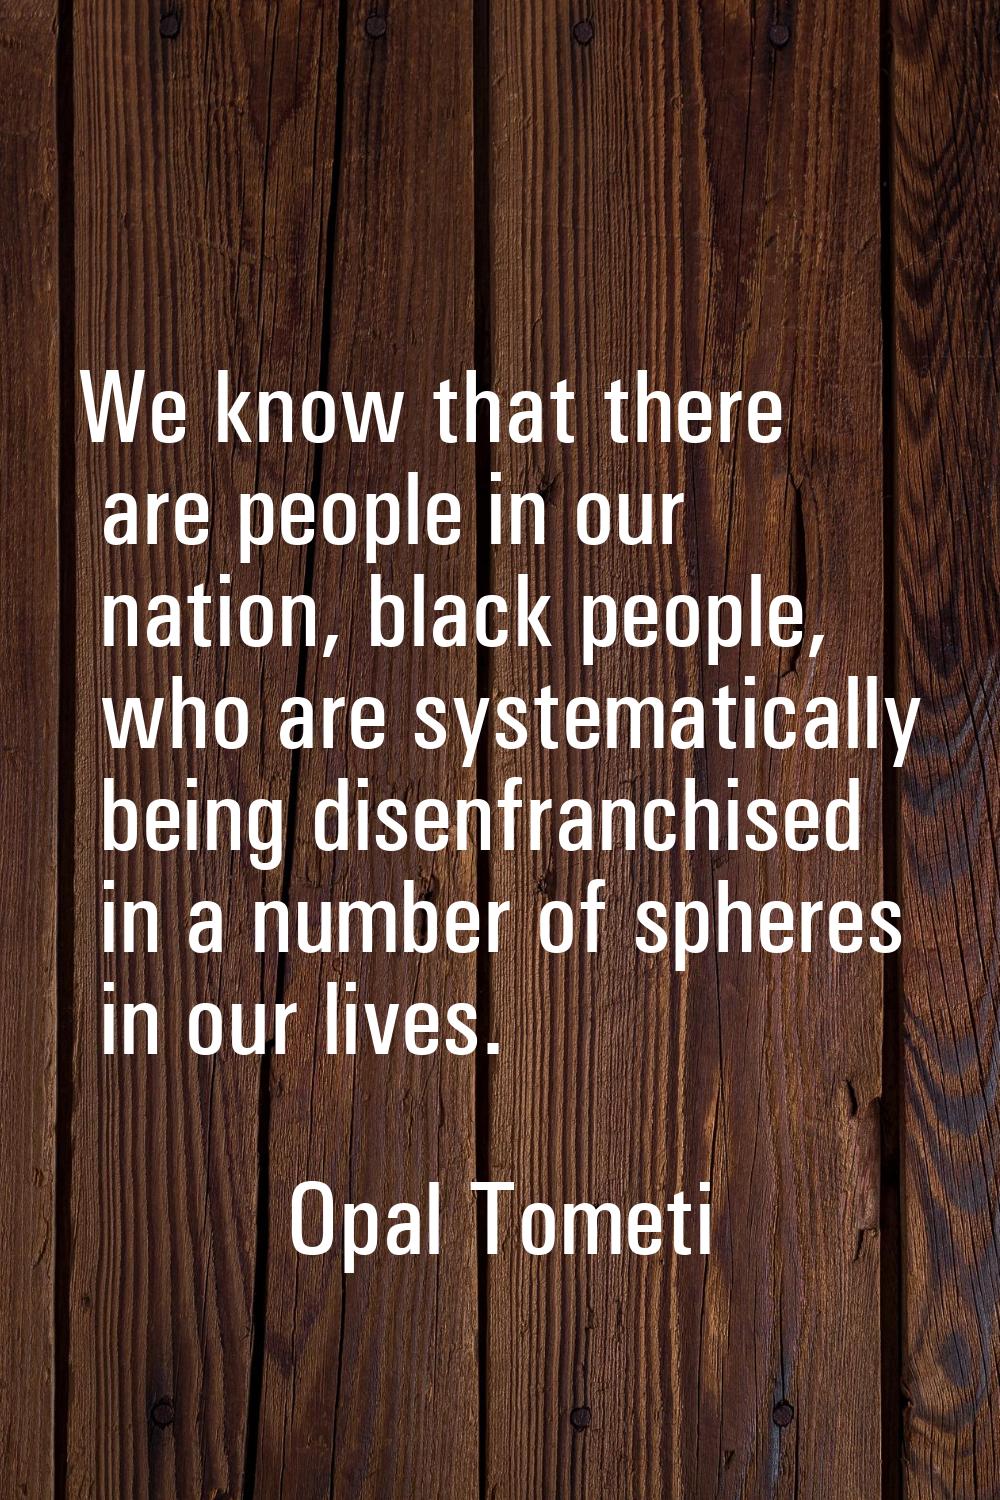 We know that there are people in our nation, black people, who are systematically being disenfranch